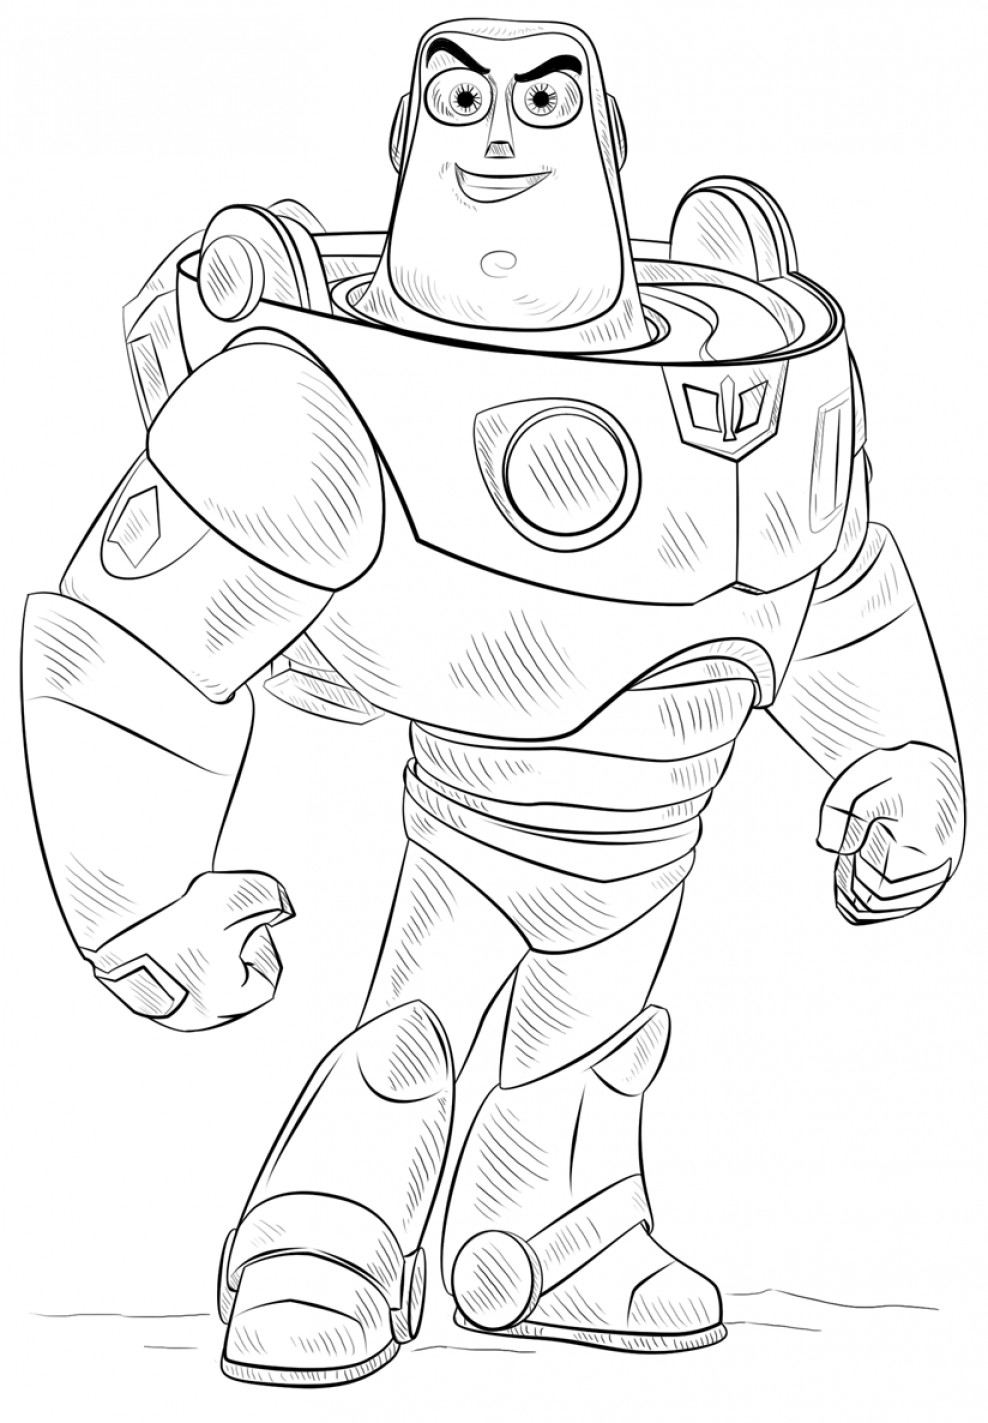 Buzz Lightyear Toy Story Coloring Pages - SheetalColor.com